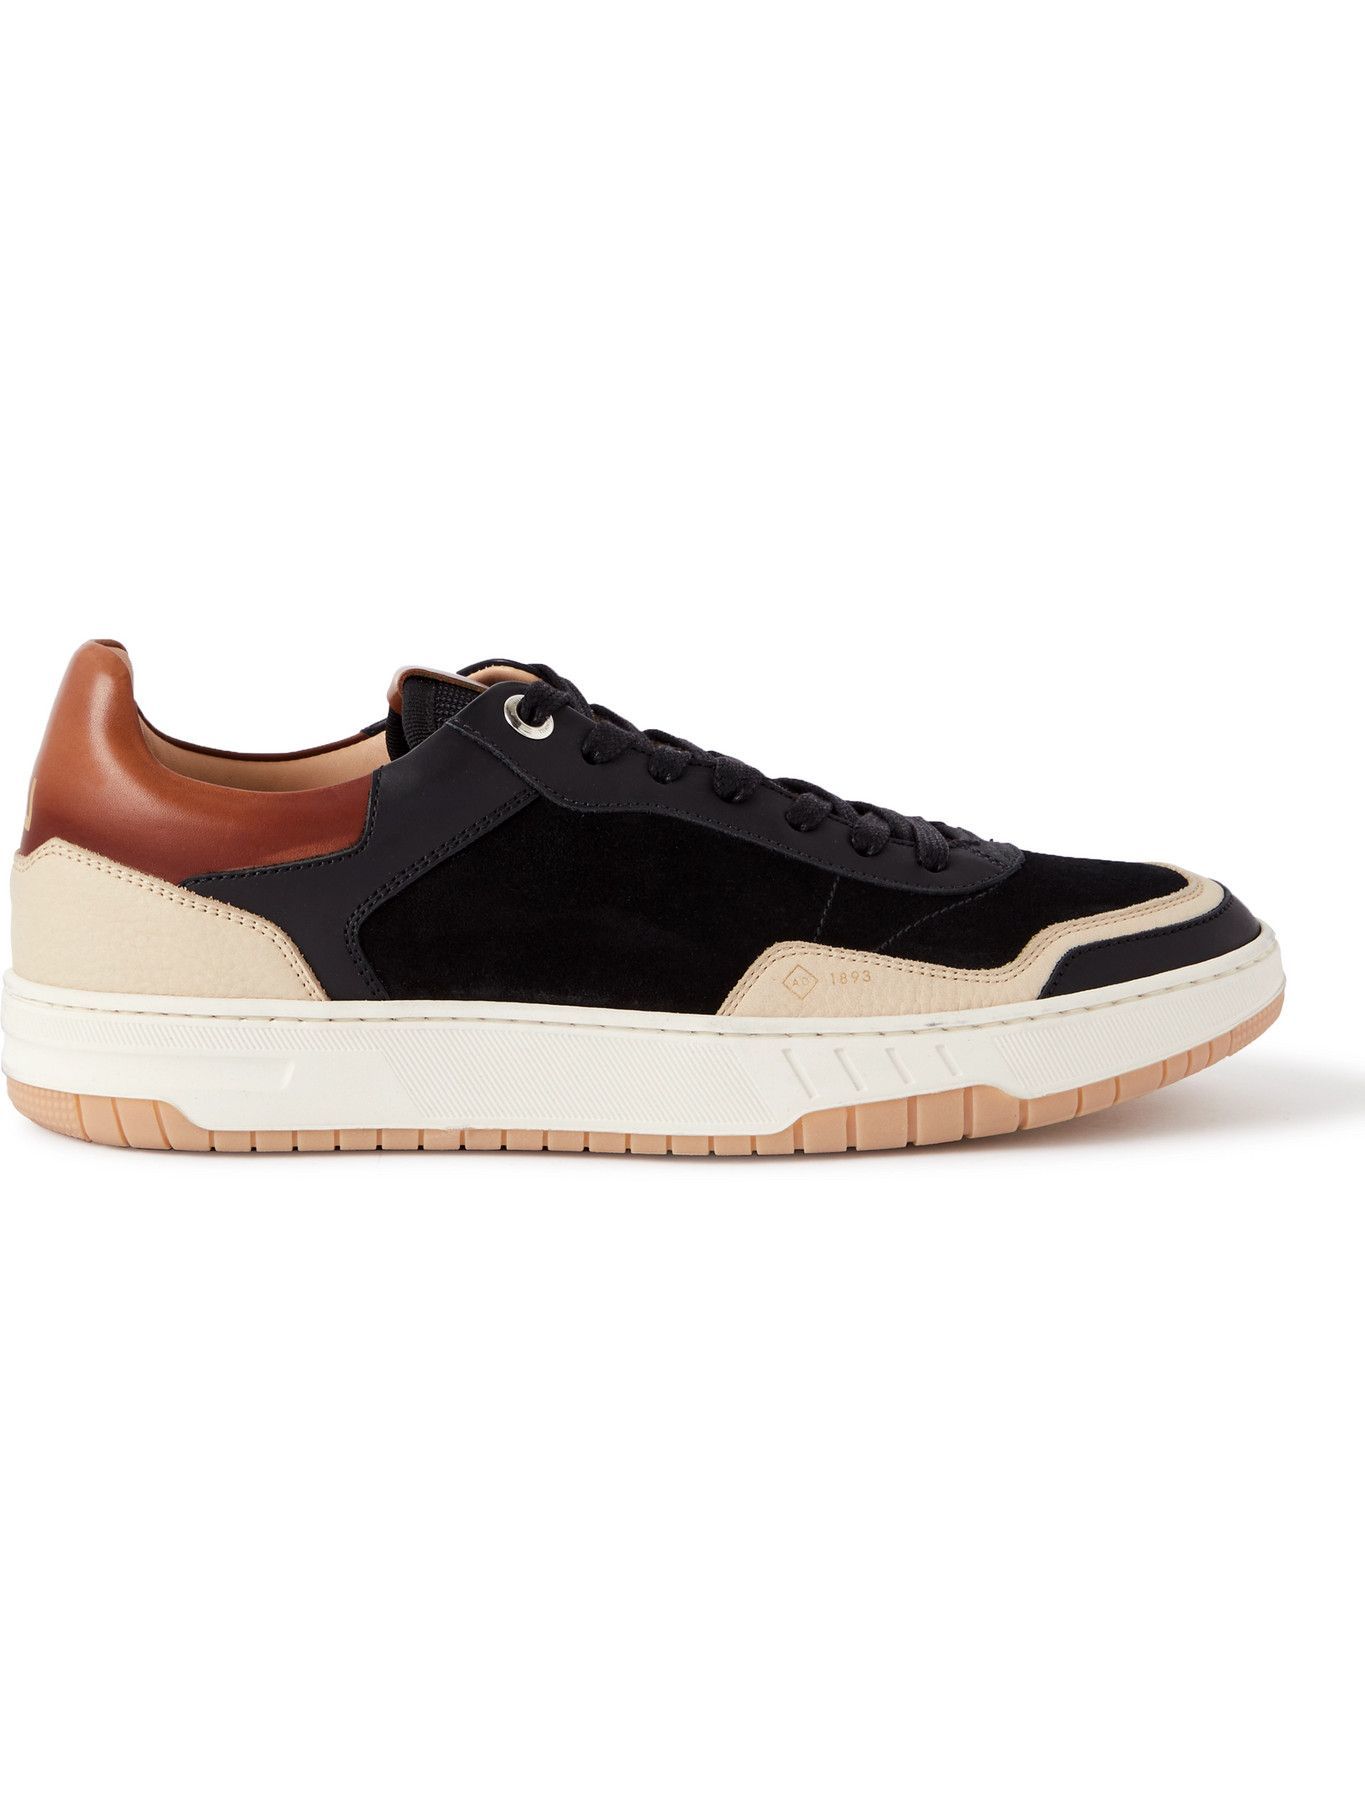 DUNHILL - Court Elite Lux Suede and Leather Sneakers - Black Dunhill